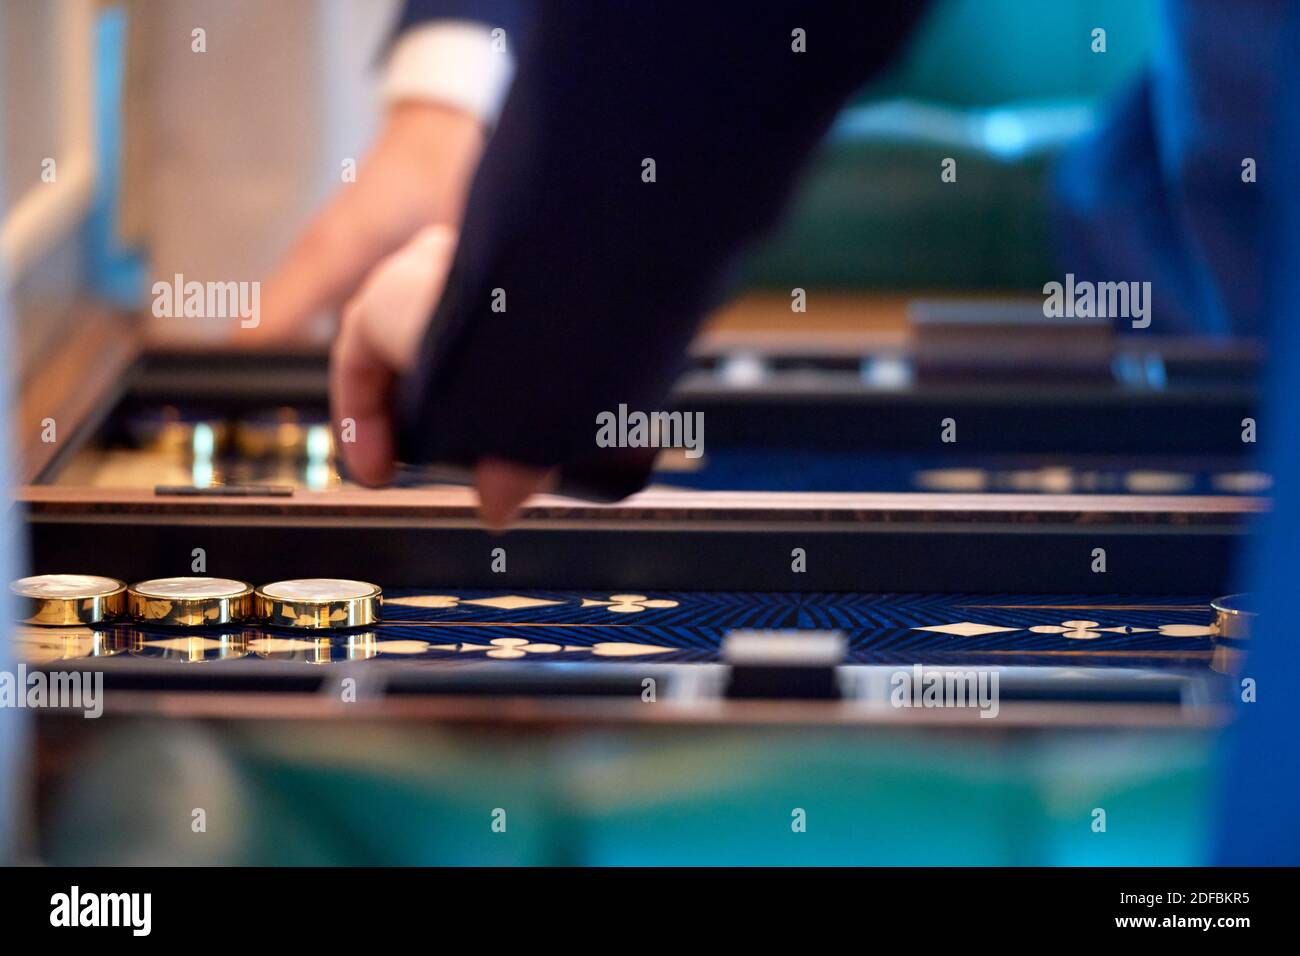 A game of Backgammon been played with close ups of hands and dice Stock Photo